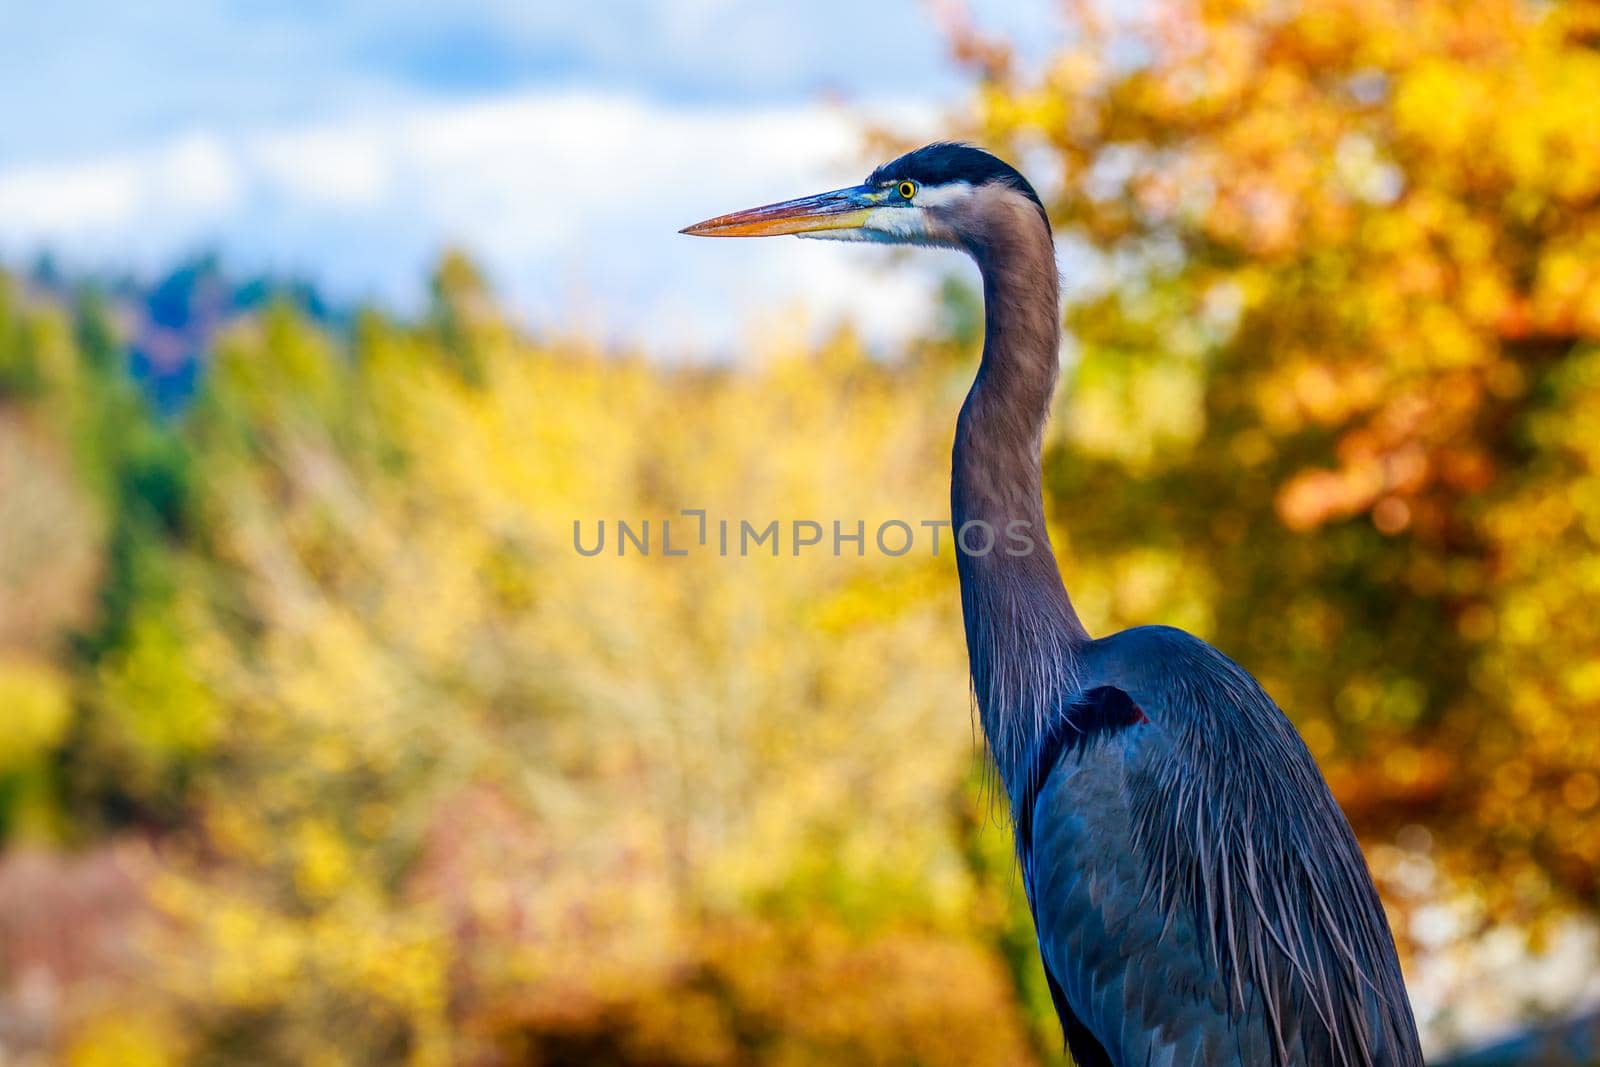 Close up of a great blue heron standing by the lake.